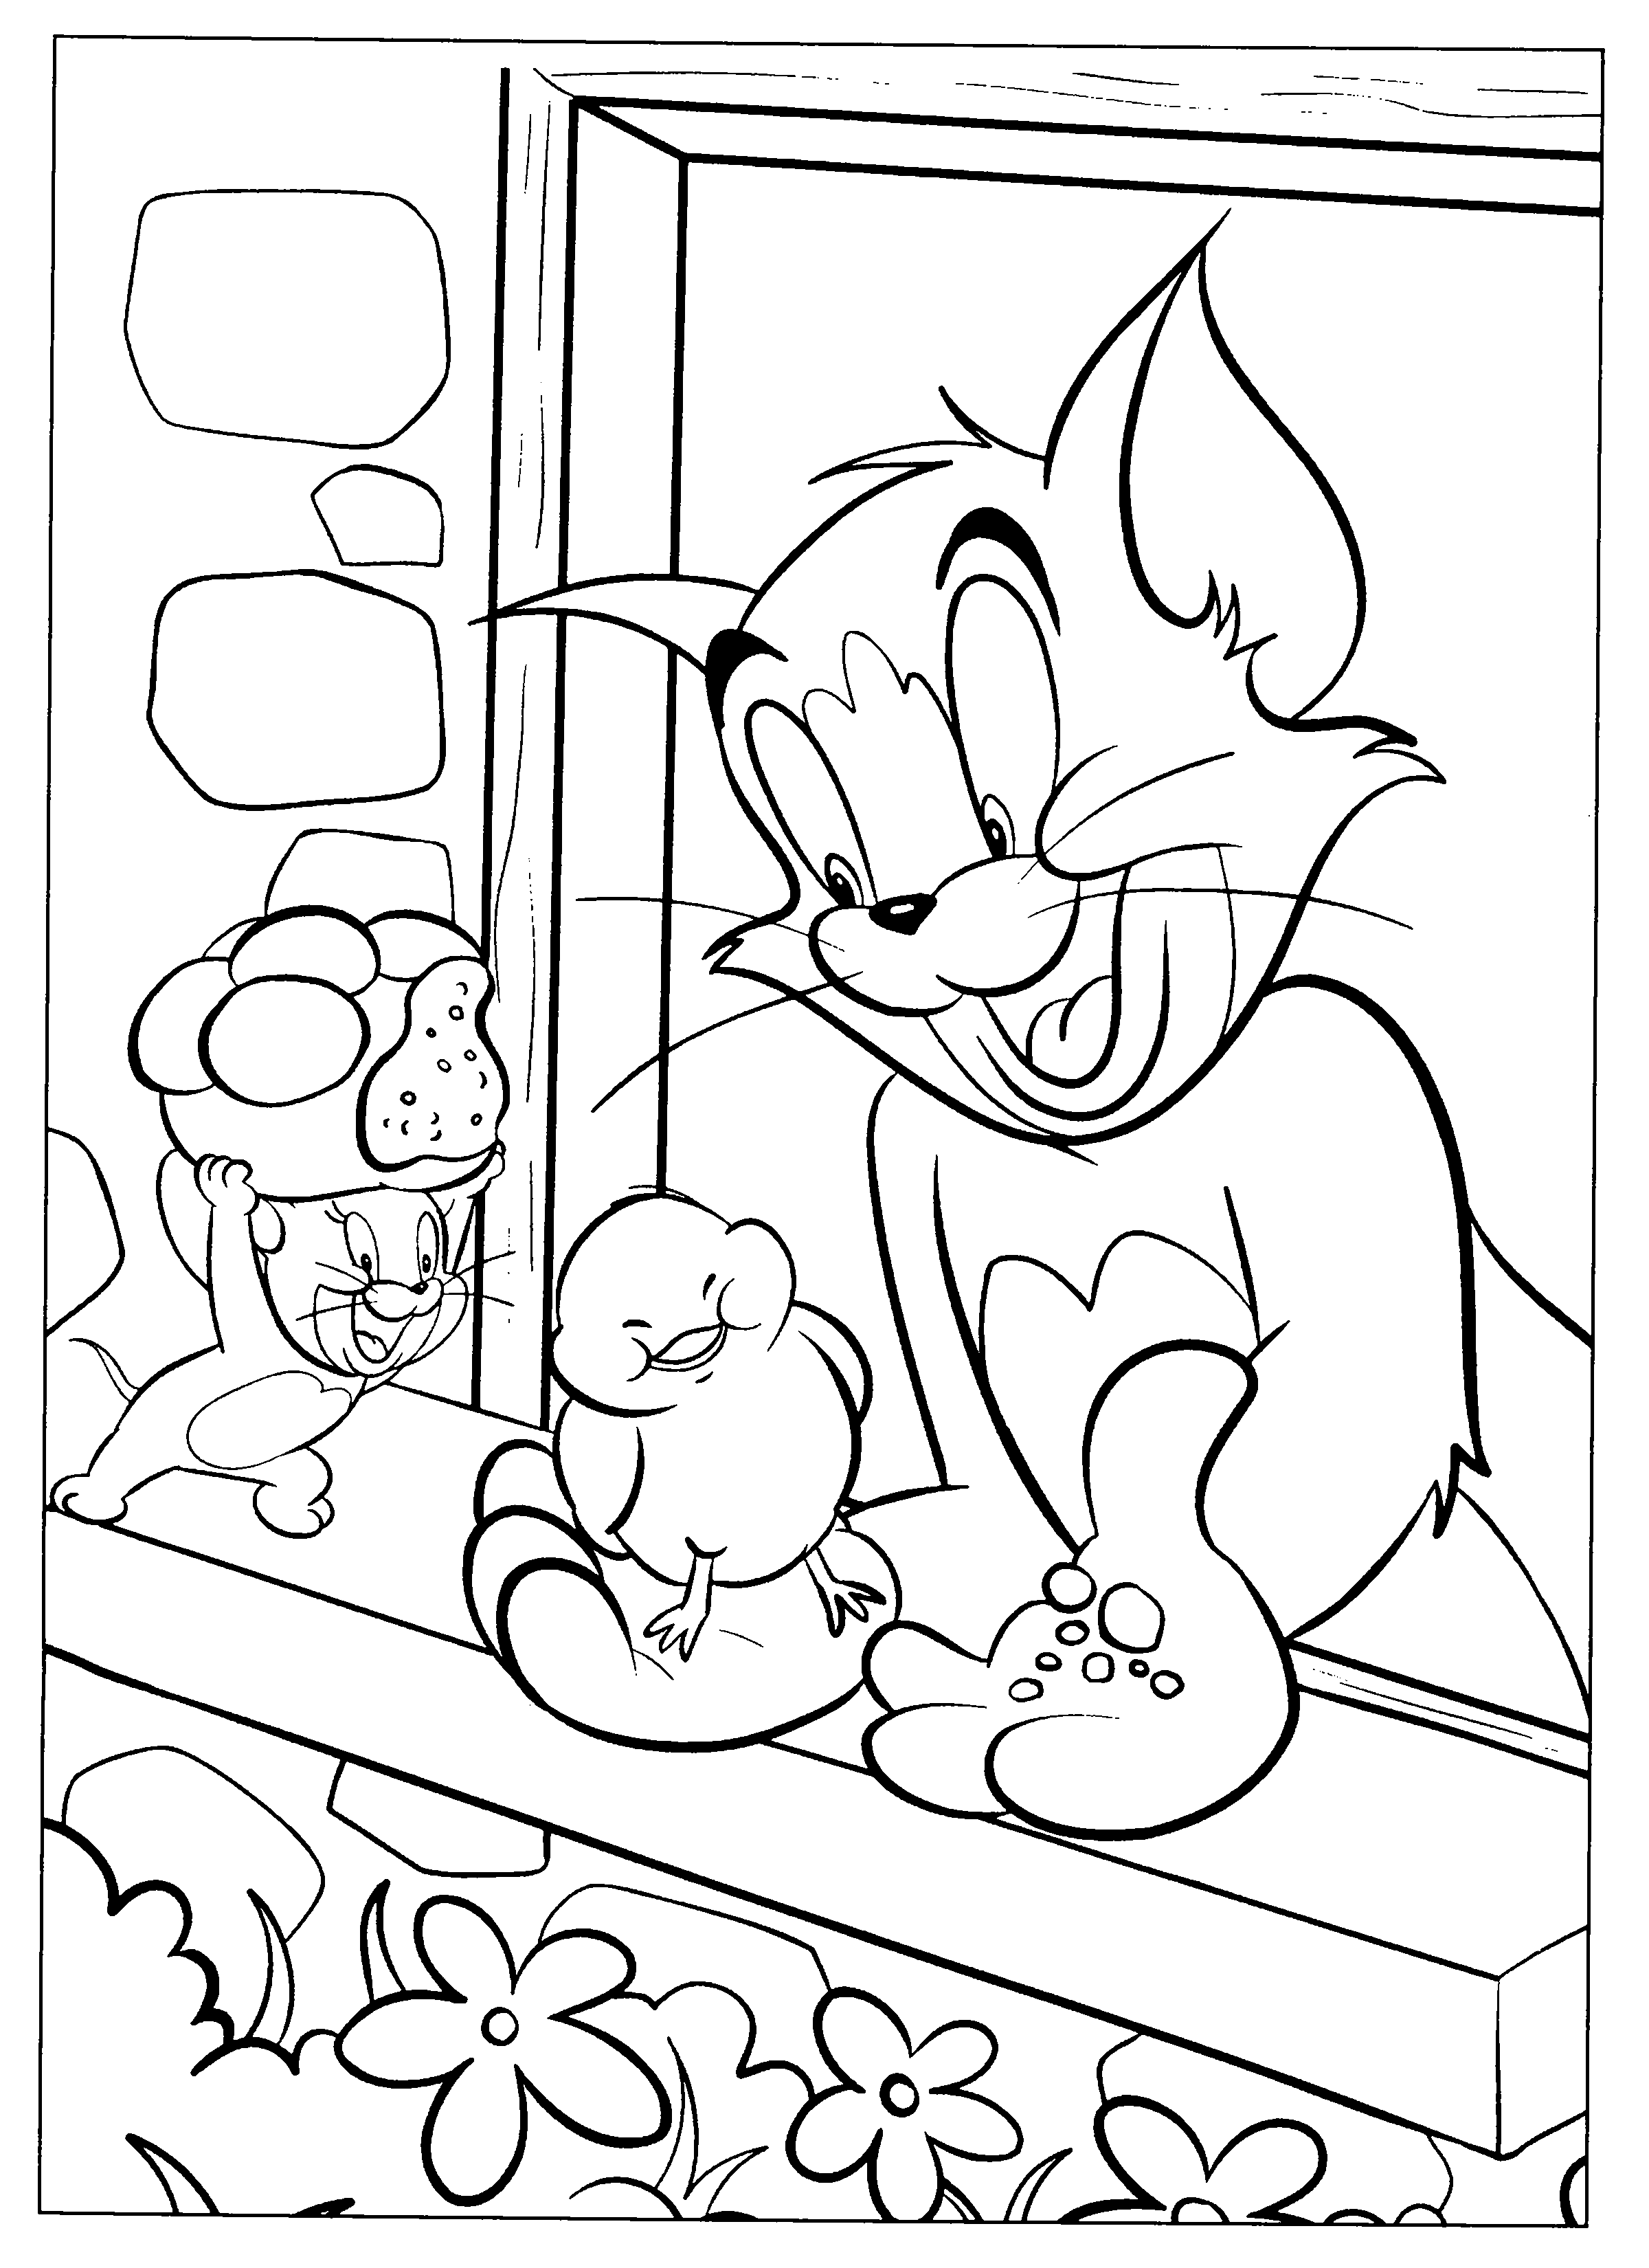 tom and jerry coloring pages online tom and jerry coloring pages online coloring pages online and jerry tom 